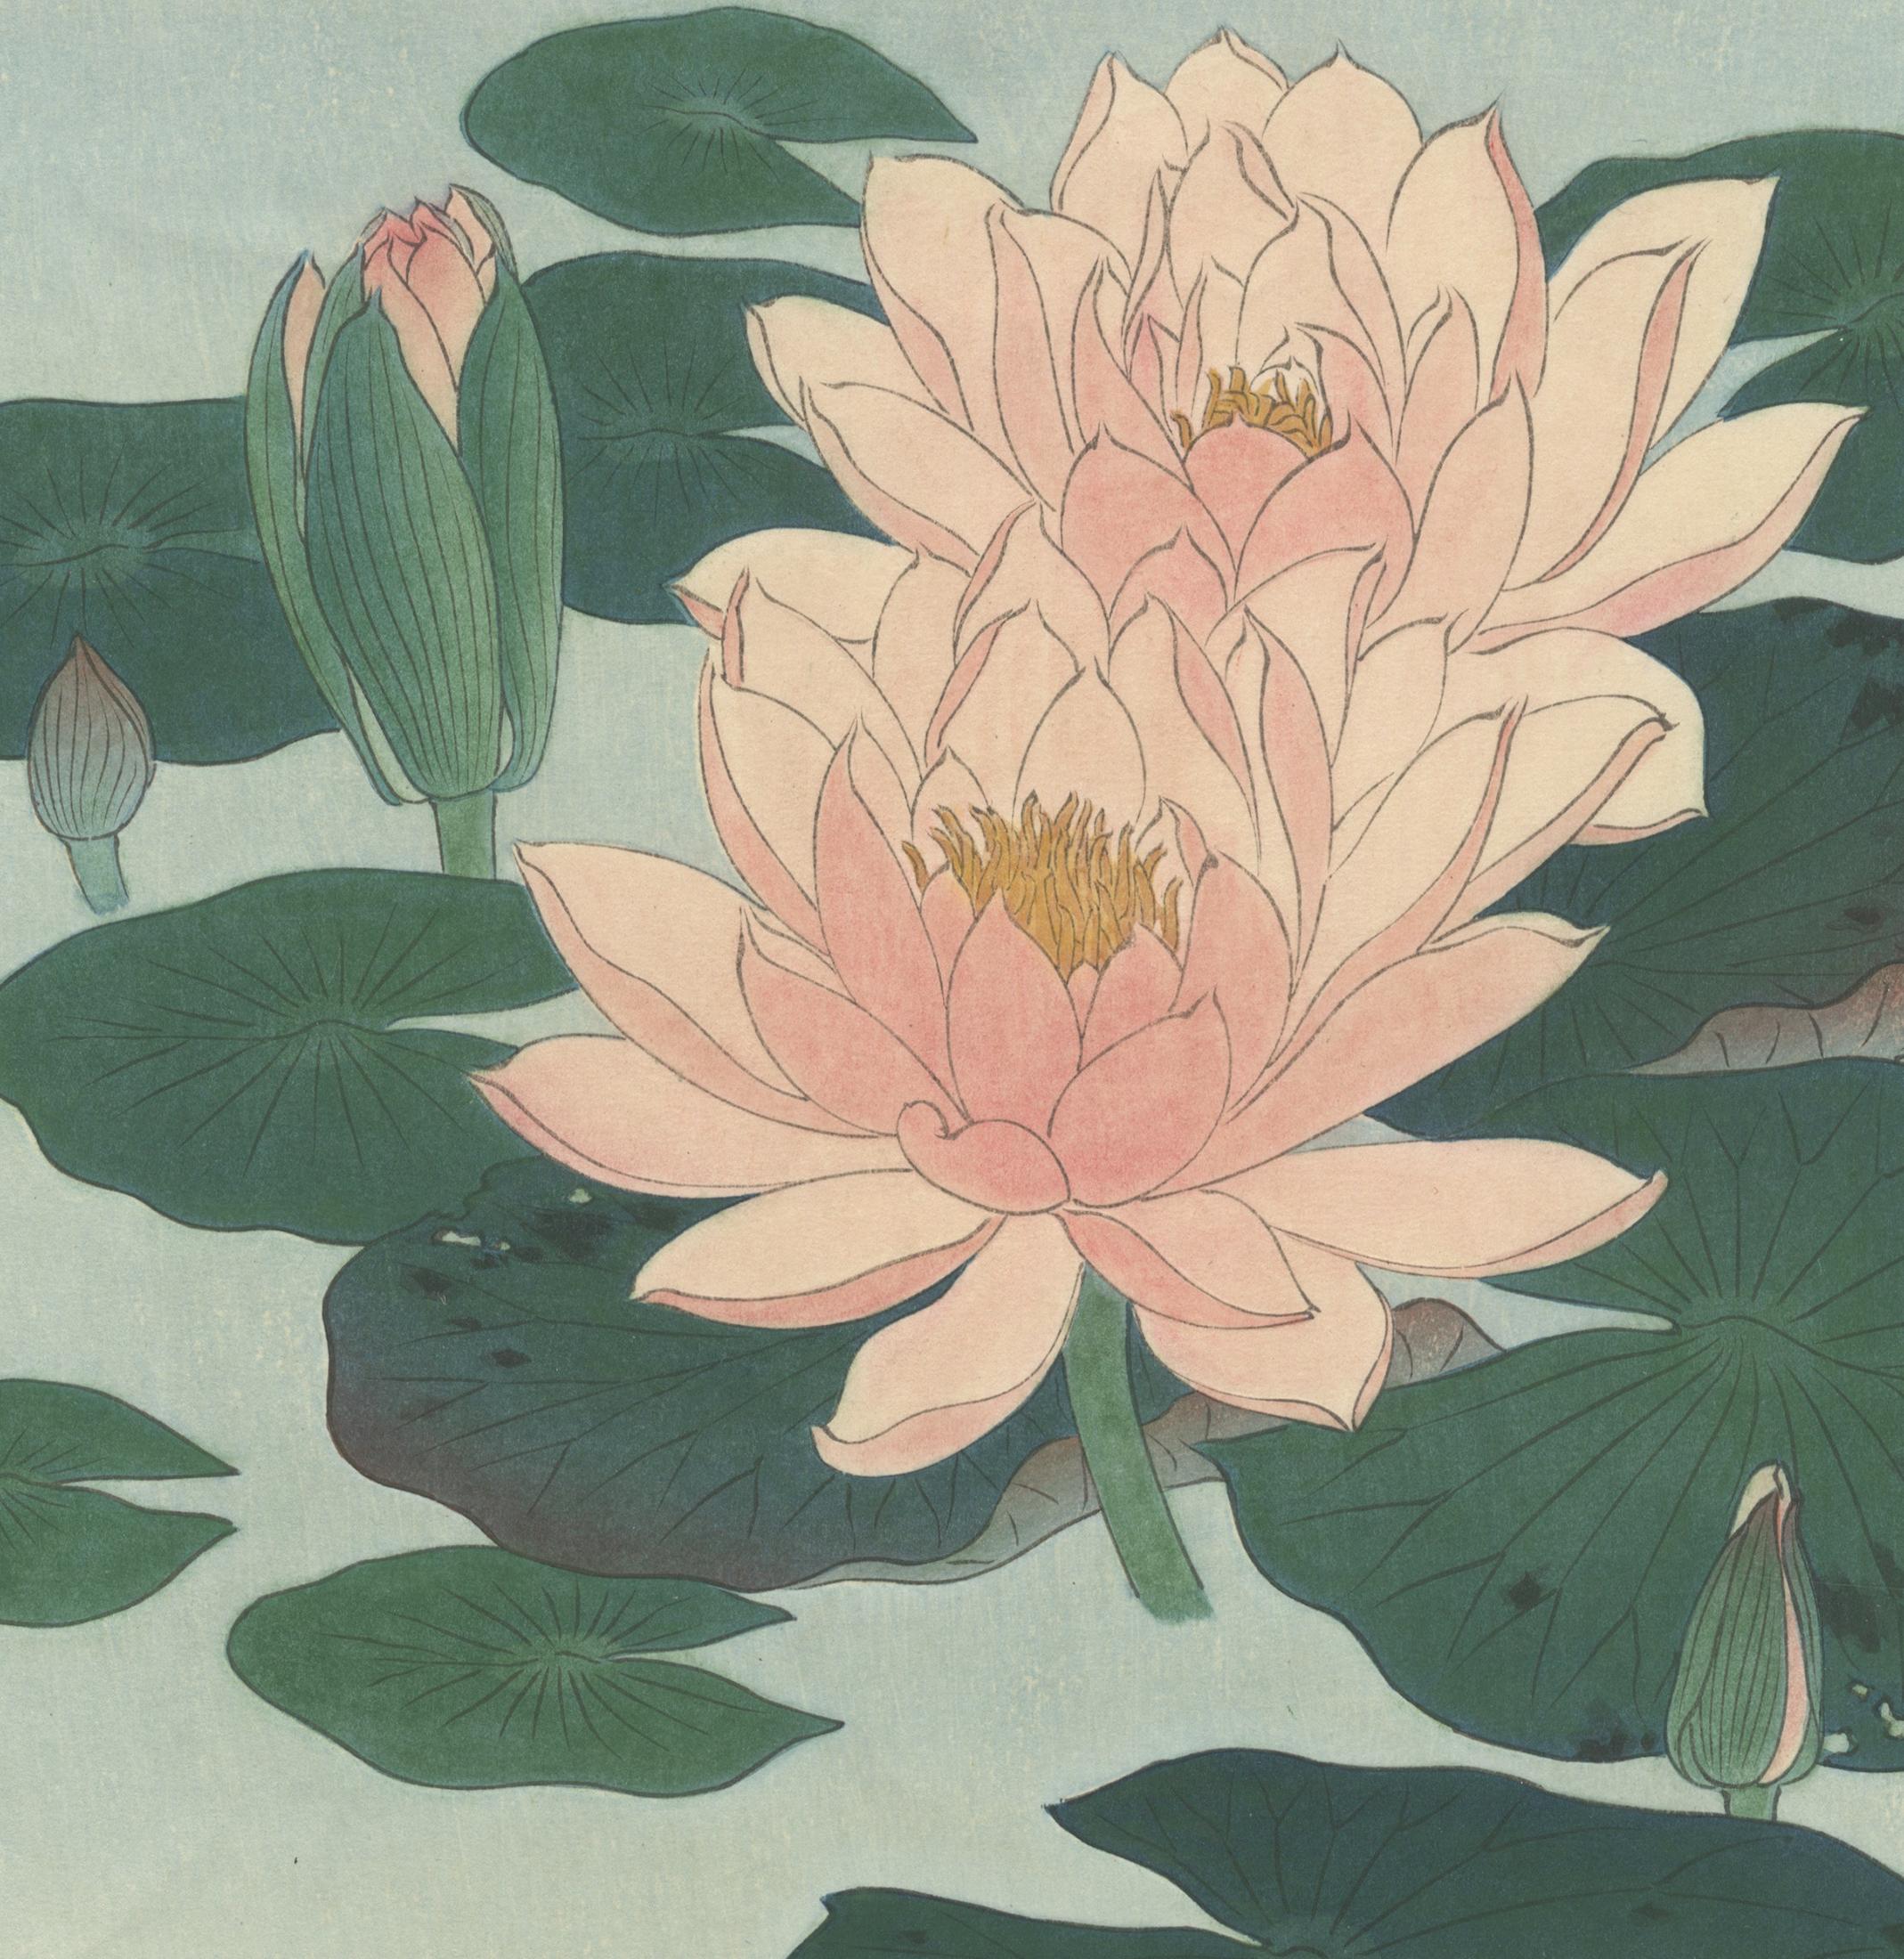 Artist: Koson Ohara (1877-1945) [signed Hōson]
Title: Flowering Water Lilies 
Publisher: Kawaguchi Bijutsusha 
Date: 1930
Dimensions: 26 x 37.2 cm

Koson's water lilies in various stages of bloom shows the artist's experimentation with standalone